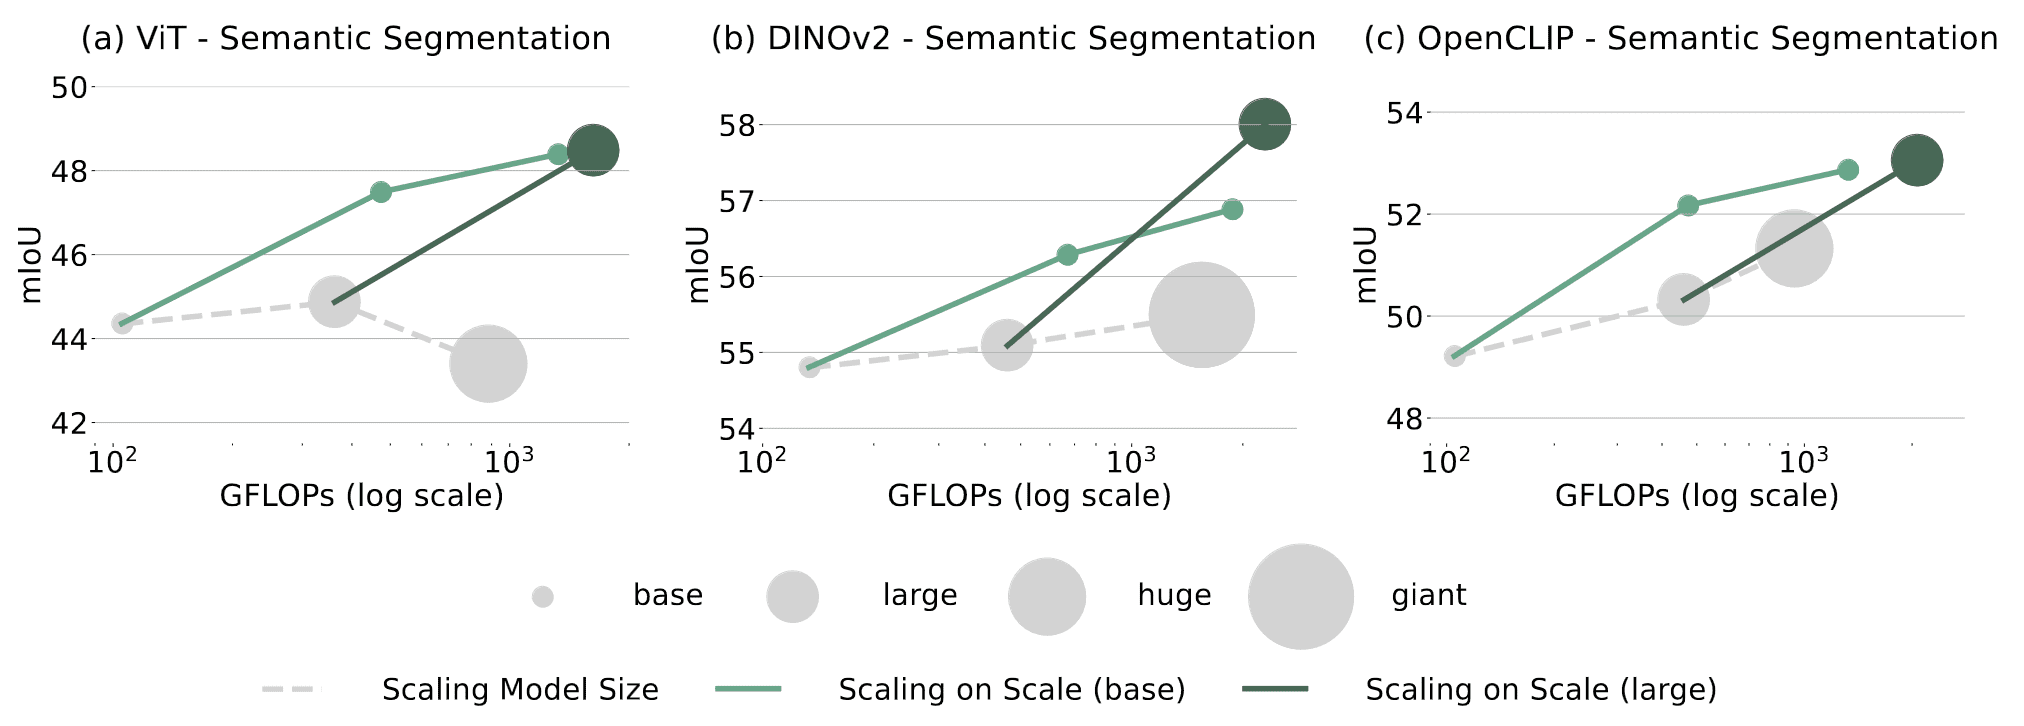 Which model size should we scale up image scales on?